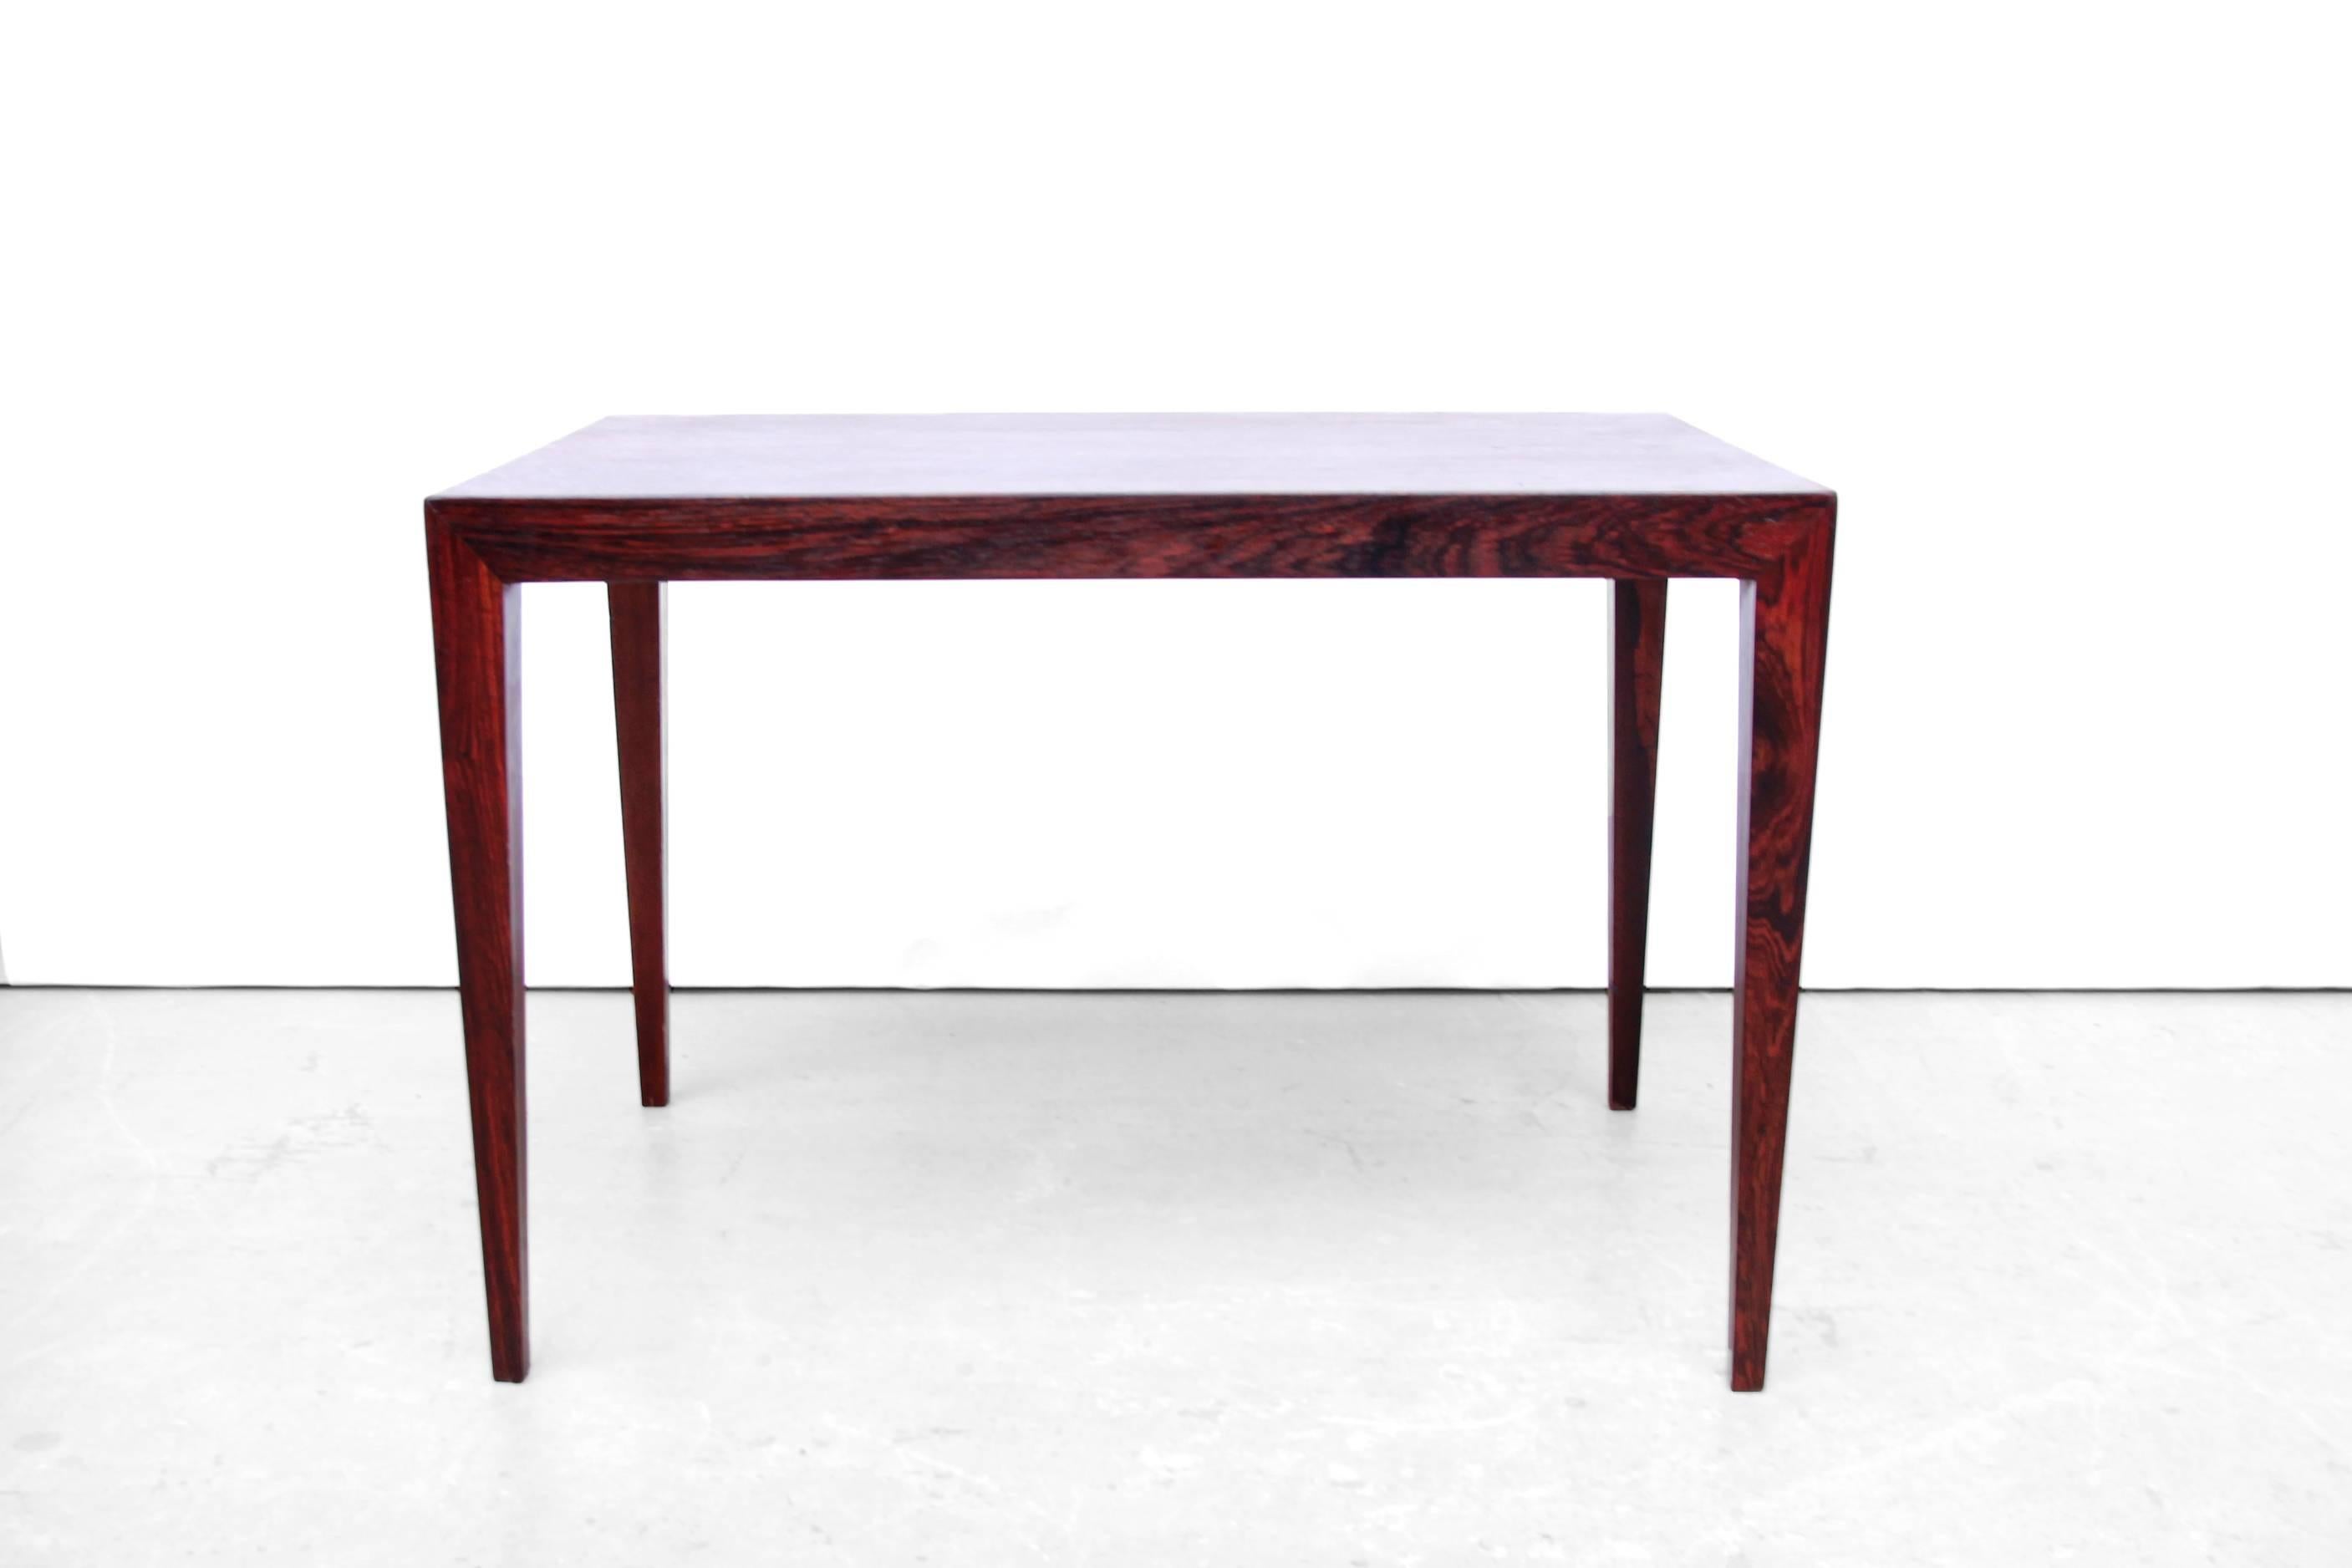 Very nice and subtle side table or small coffee table designed by Severin Hansen jr for Haslev Møbelfabrik. Beatiful grained rosewood, nicely finished. 
The table is made of rosewood veneer with beautiful geometric connection of the legs to the